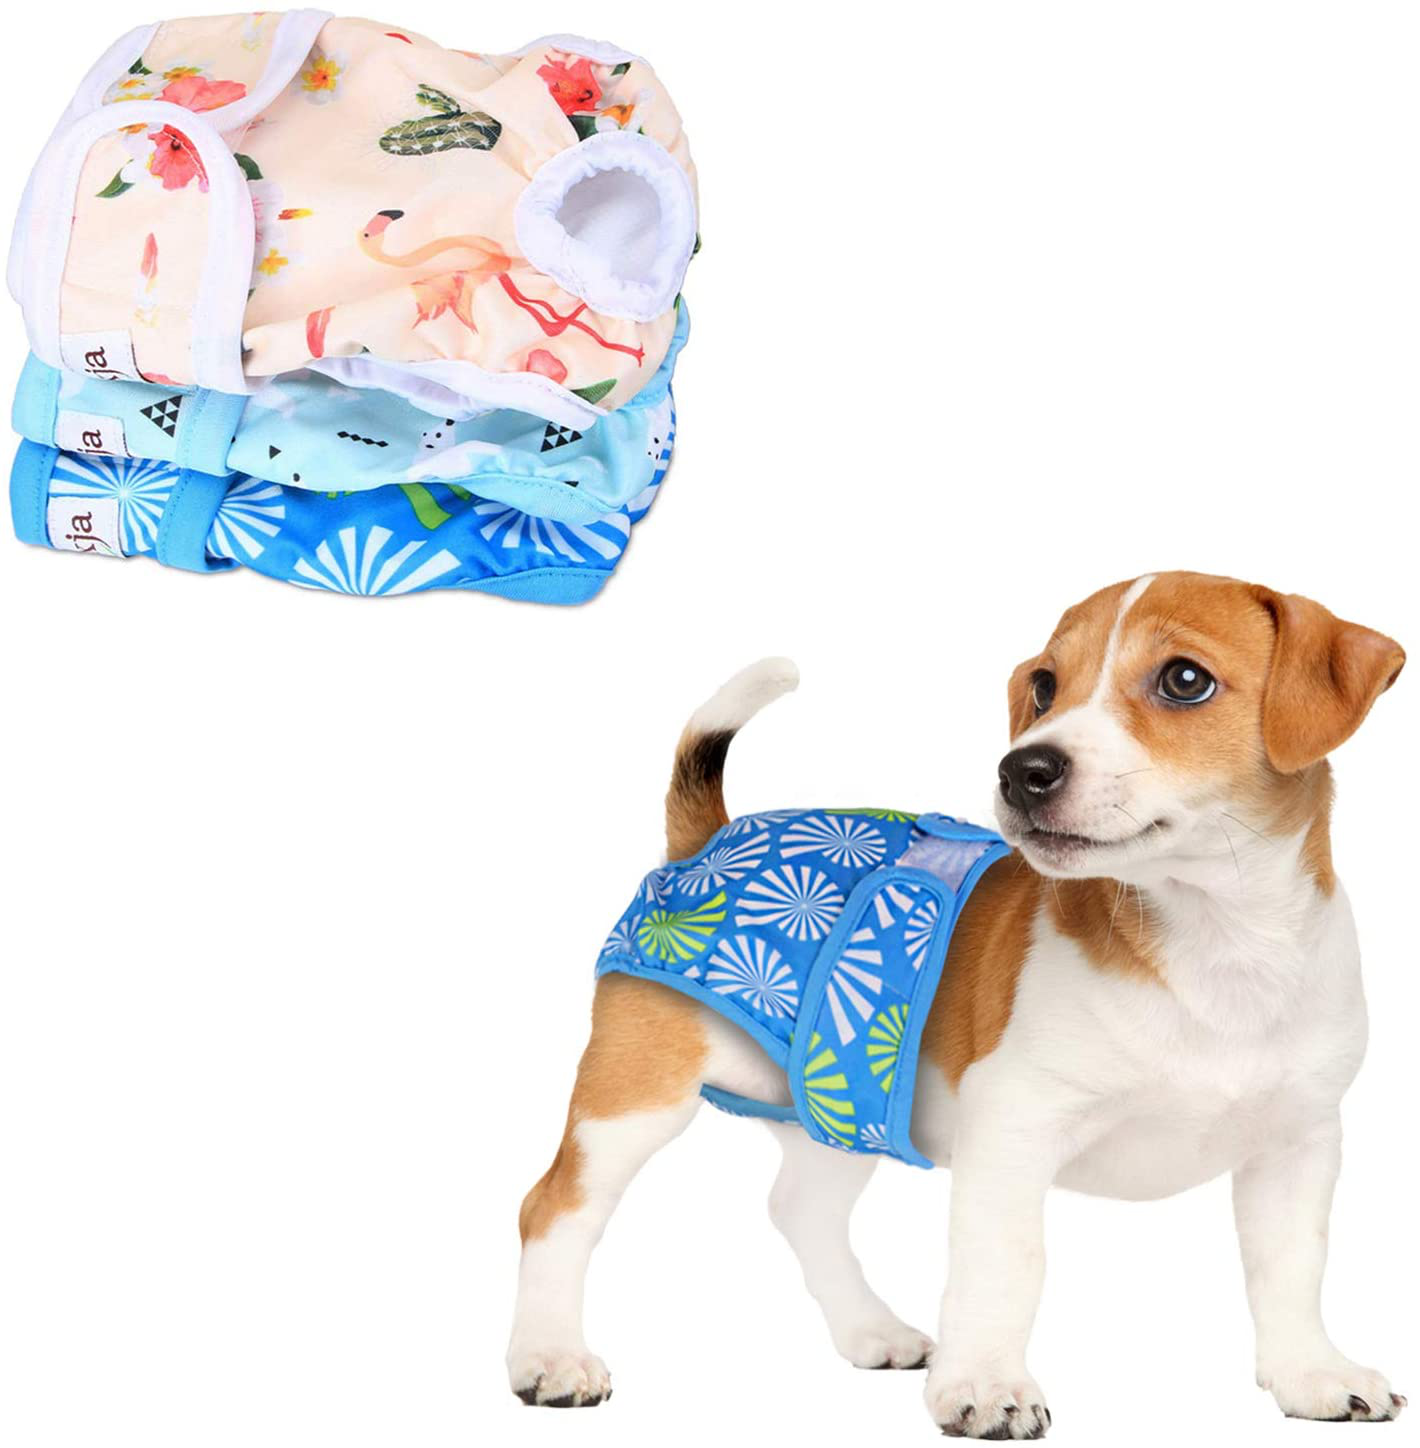 LUXJA Reusable Female Dog Diapers (Pack of 3), Washable Wraps for Female Dog (Flamingos+Polar Bears+Flowers)